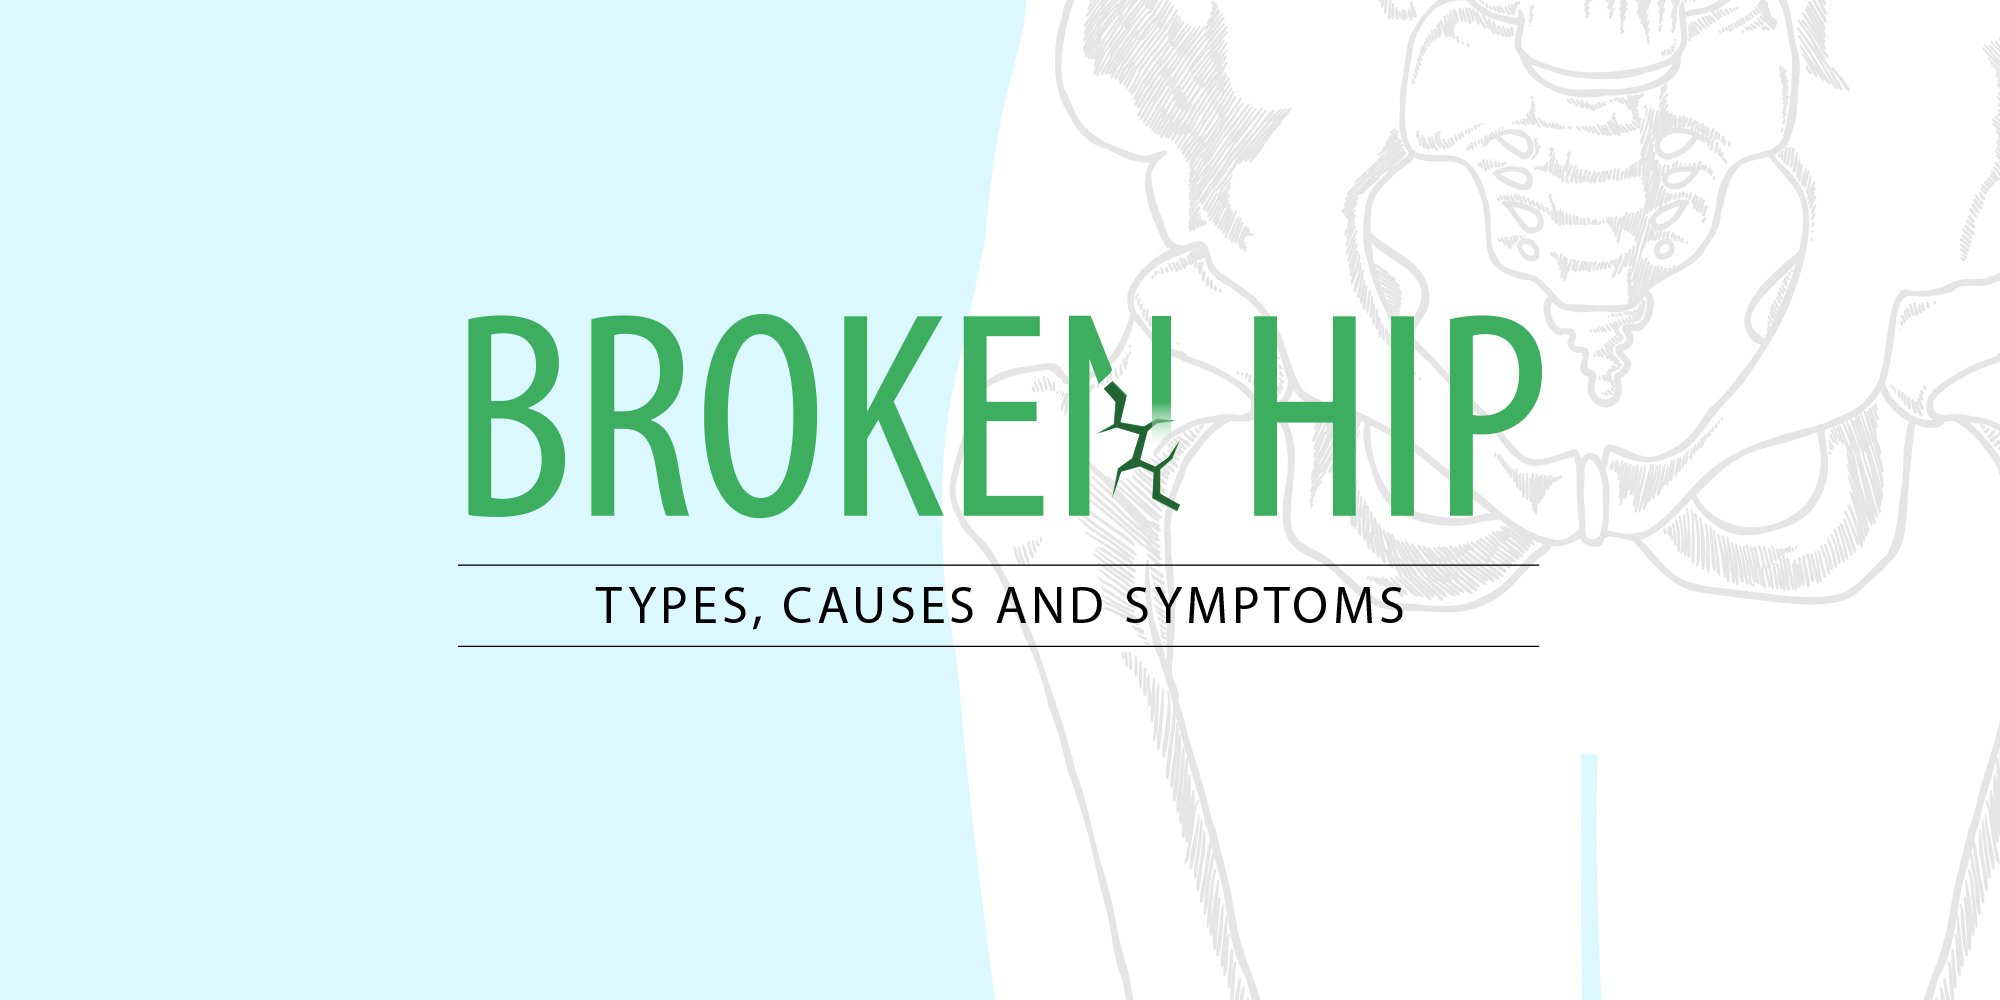 Broken Hip: Types, Causes and Symptoms